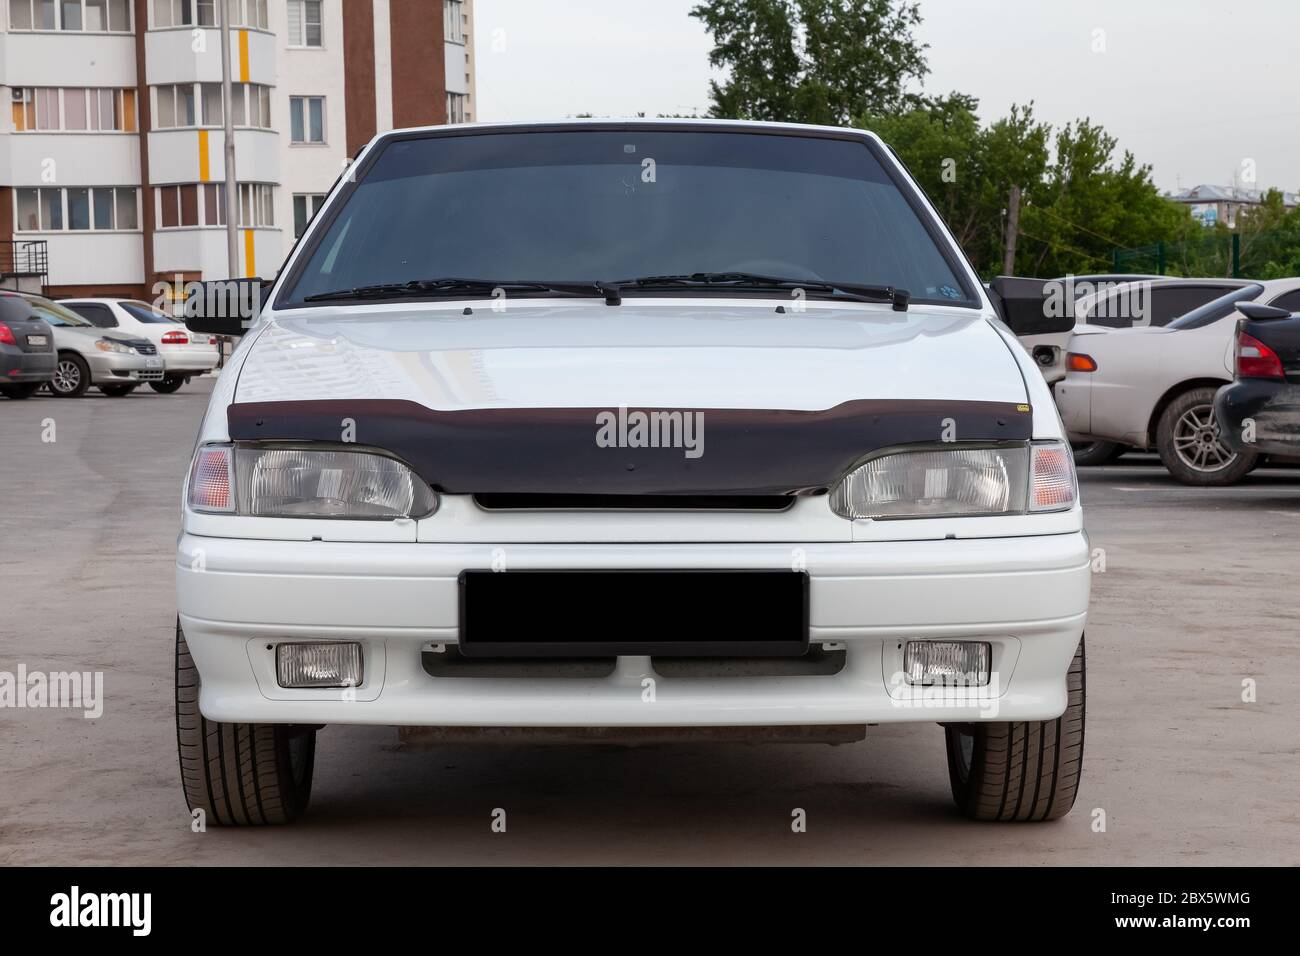 Novosibirsk, Russia - 05/20/2020: front part of a white Russian car brand VAZ model 2114 on the background of an apartment building and cars with dire Stock Photo